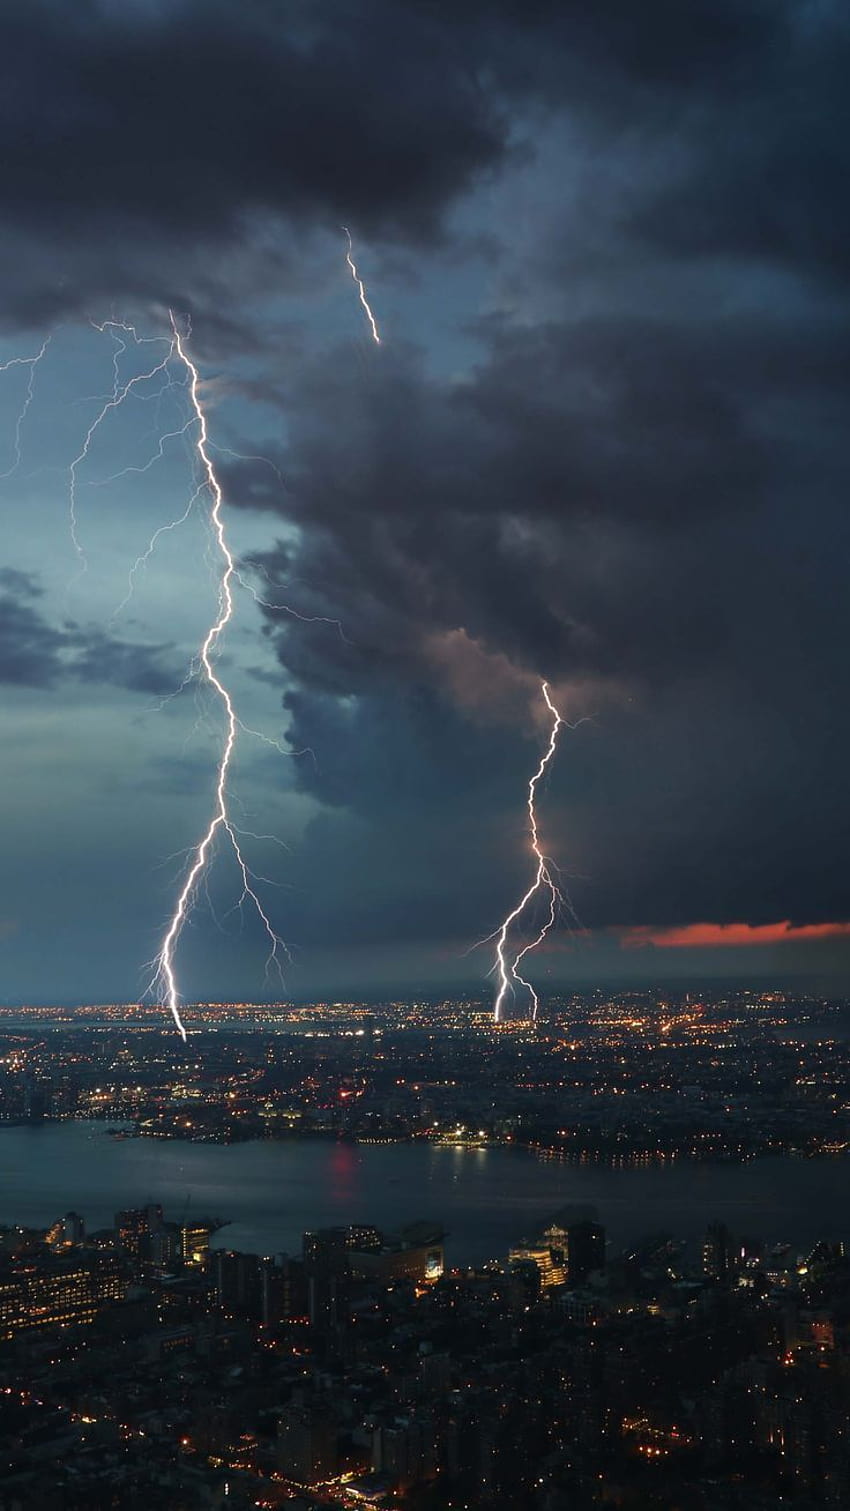 Wallpaper clouds, lightning, bad weather images for desktop, section  природа - download